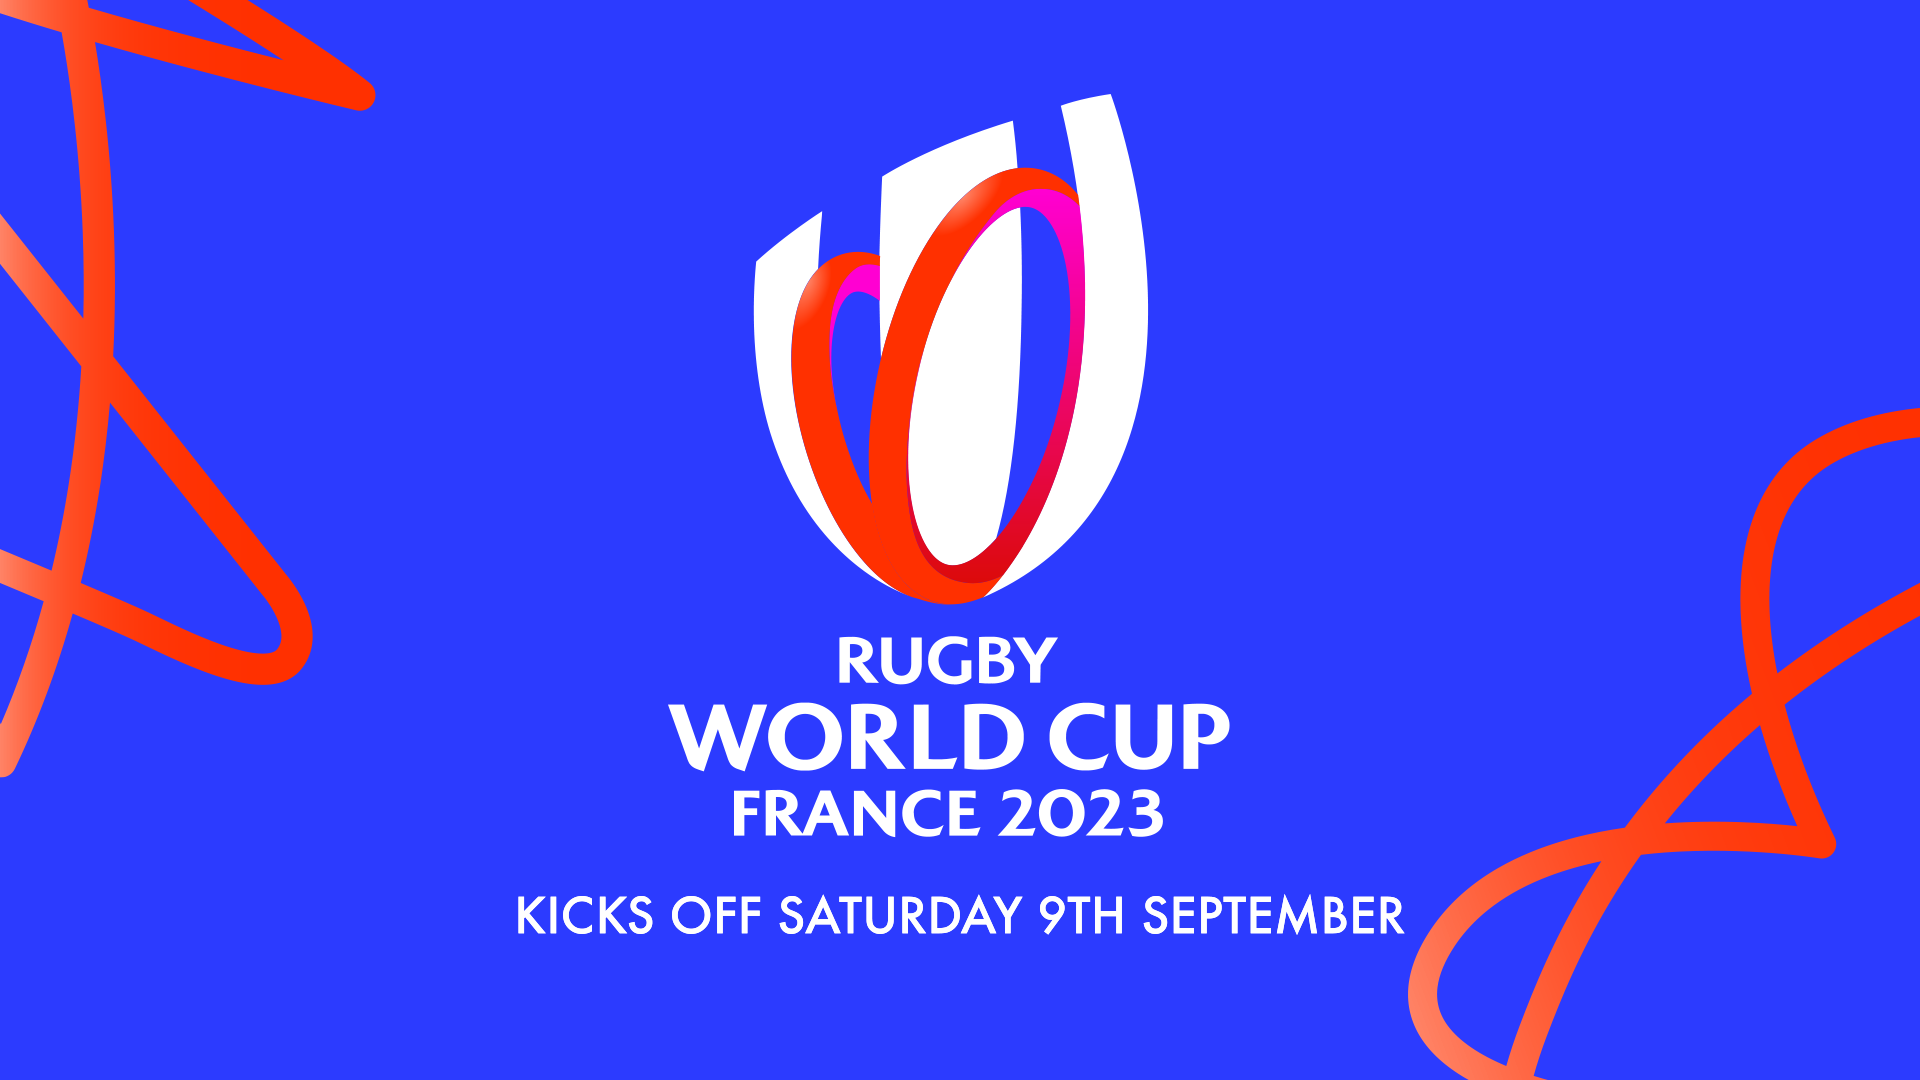 Rugby World Cup 2023 - Best Sports Bar in Perth for Rugby | Varsity